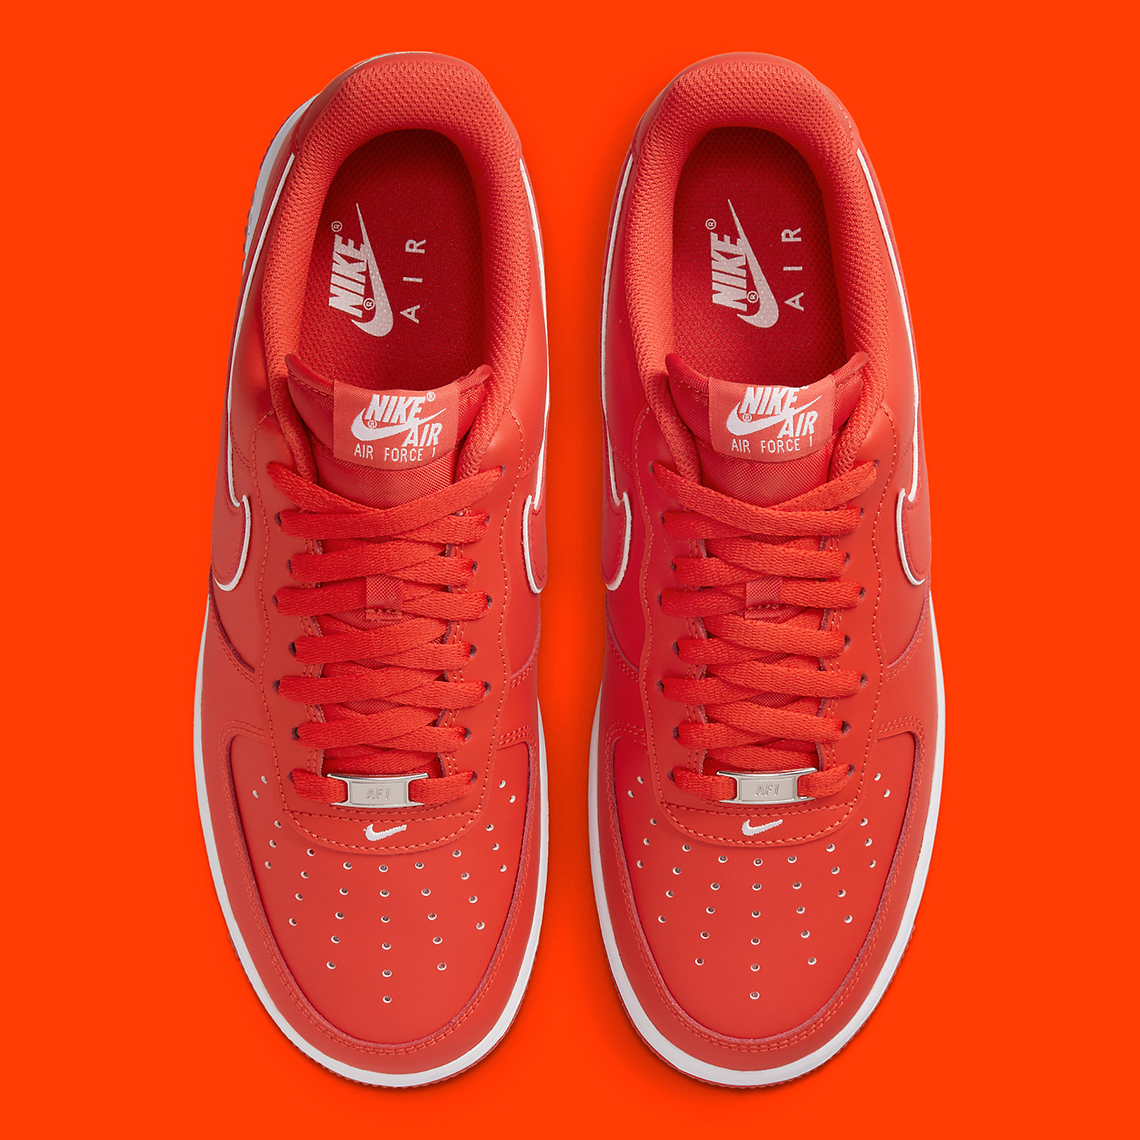 nike air force 1 low picante red DV0788 600 5